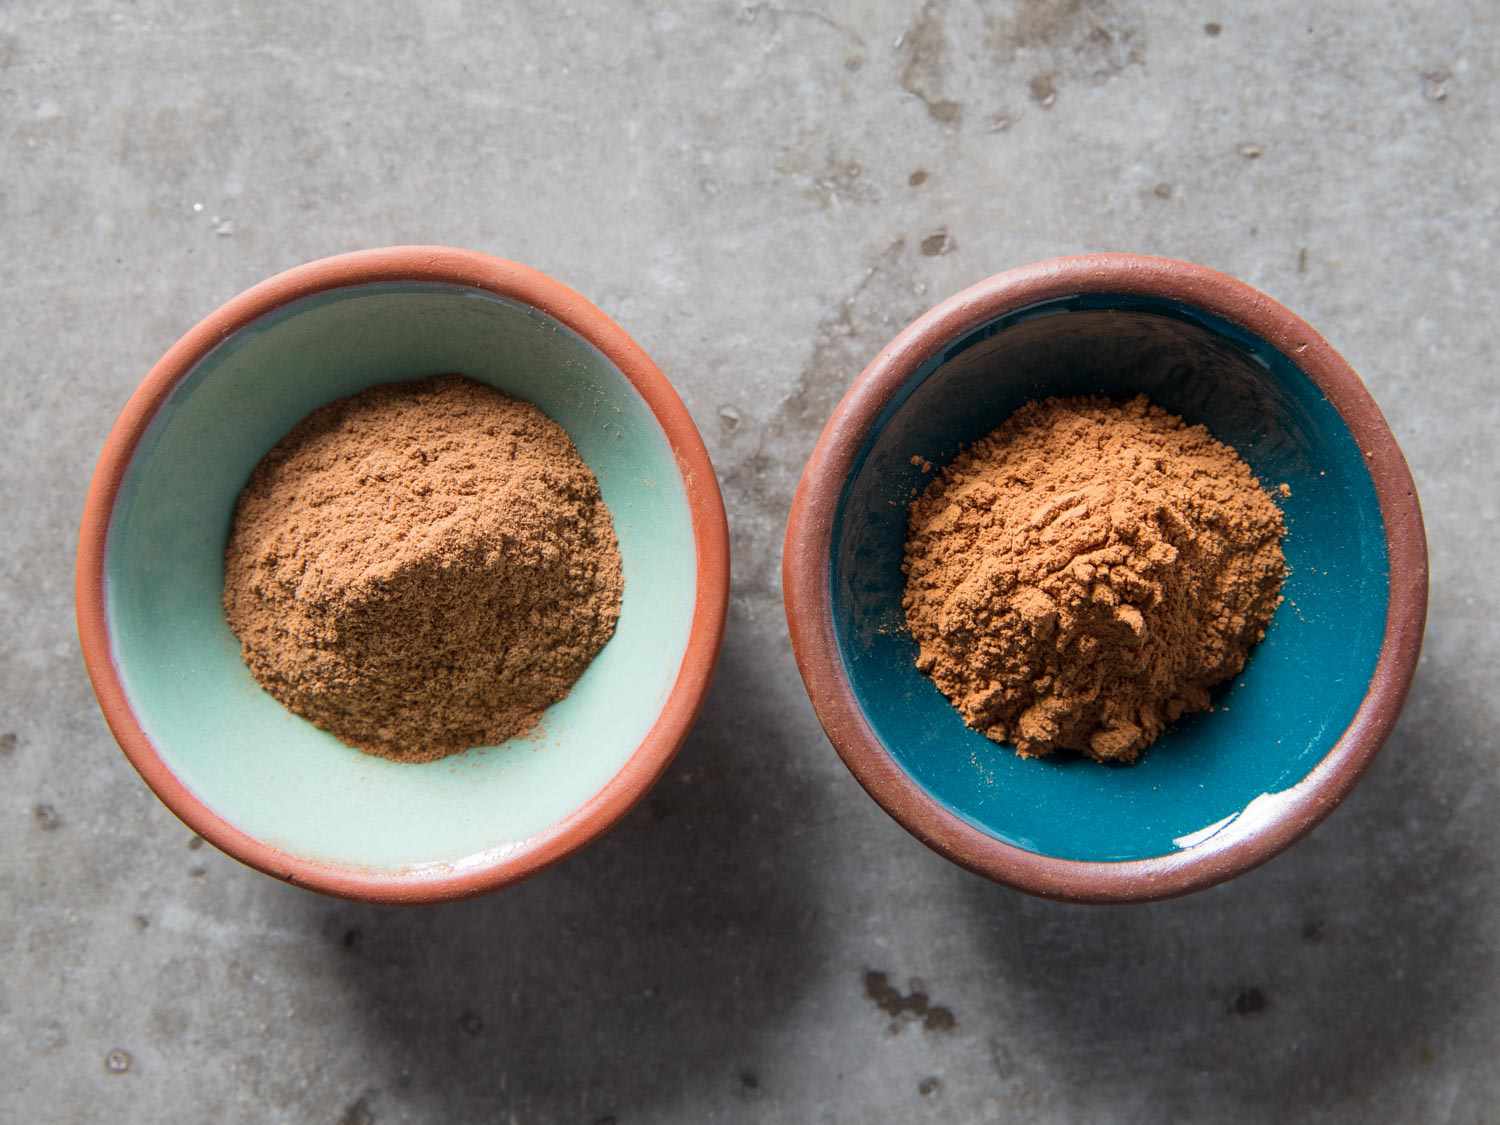 two small bowls of cinnamon side by side. Ceylon cinnamon is on the left, and cassia cinnamon is on the right.